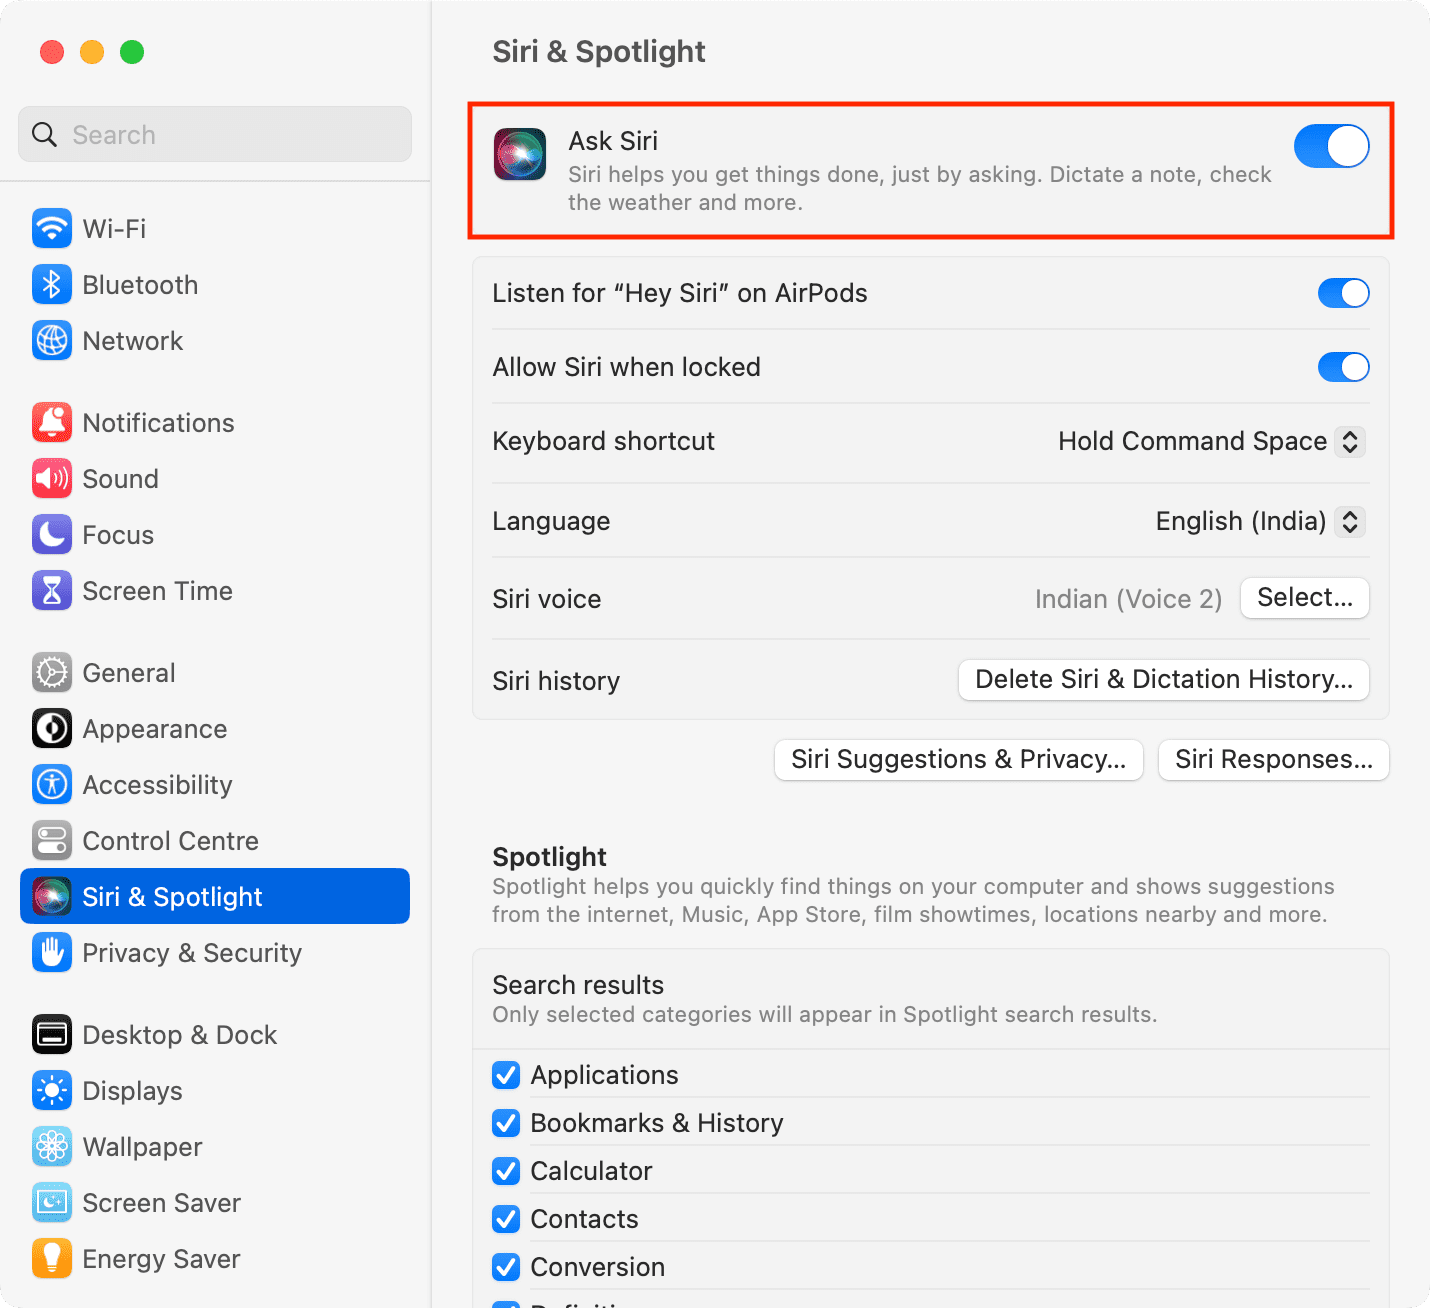 Siri enabled on Mac from System Settings